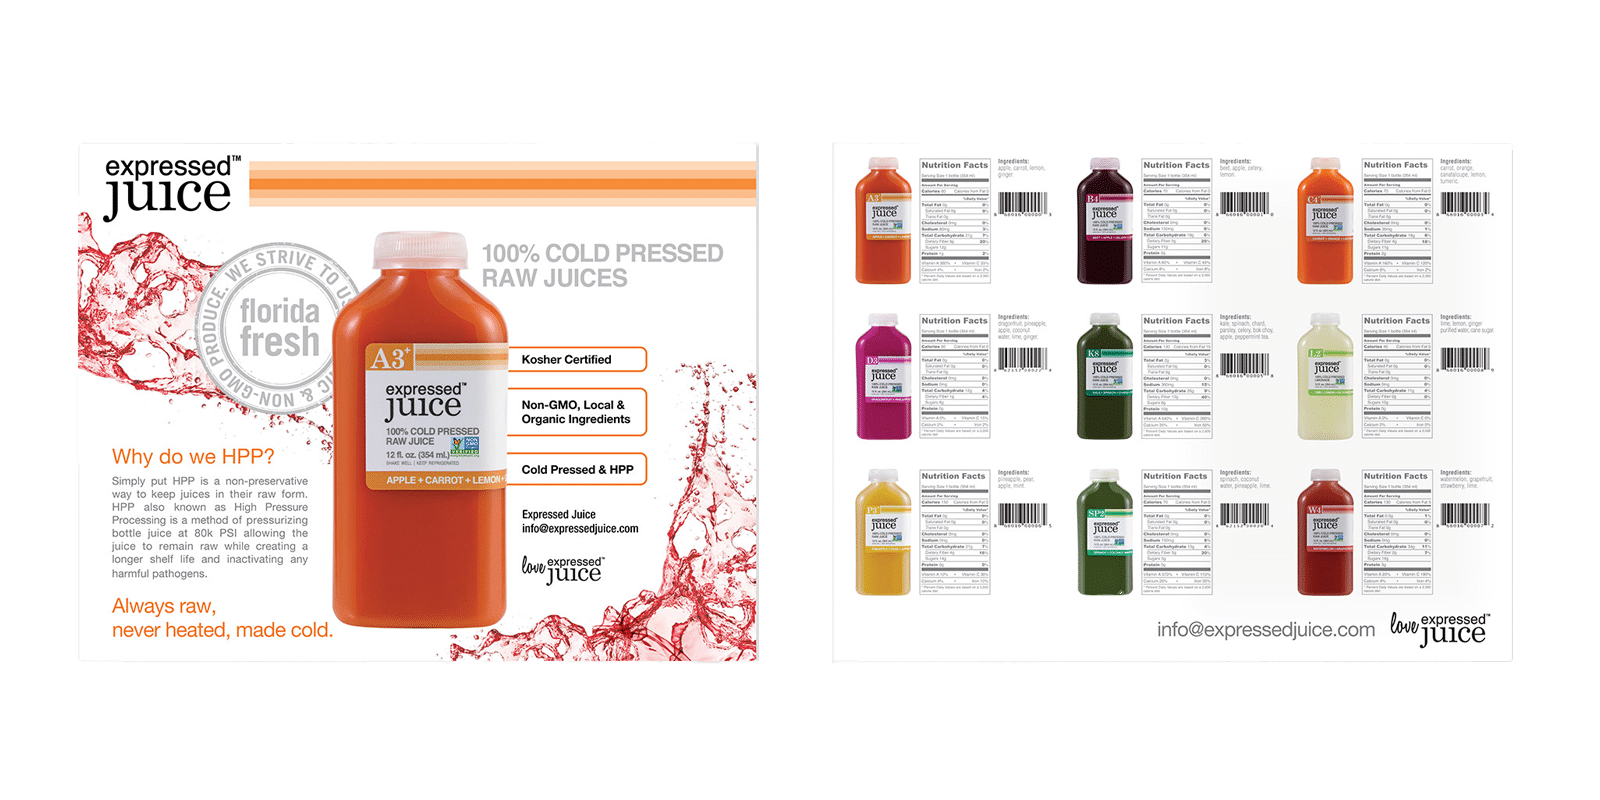 Expressed Juice sell sheets featuring a large orange bottle and a splash of juice with information about the juice on one side, and a grid of all flavors with ingredients.